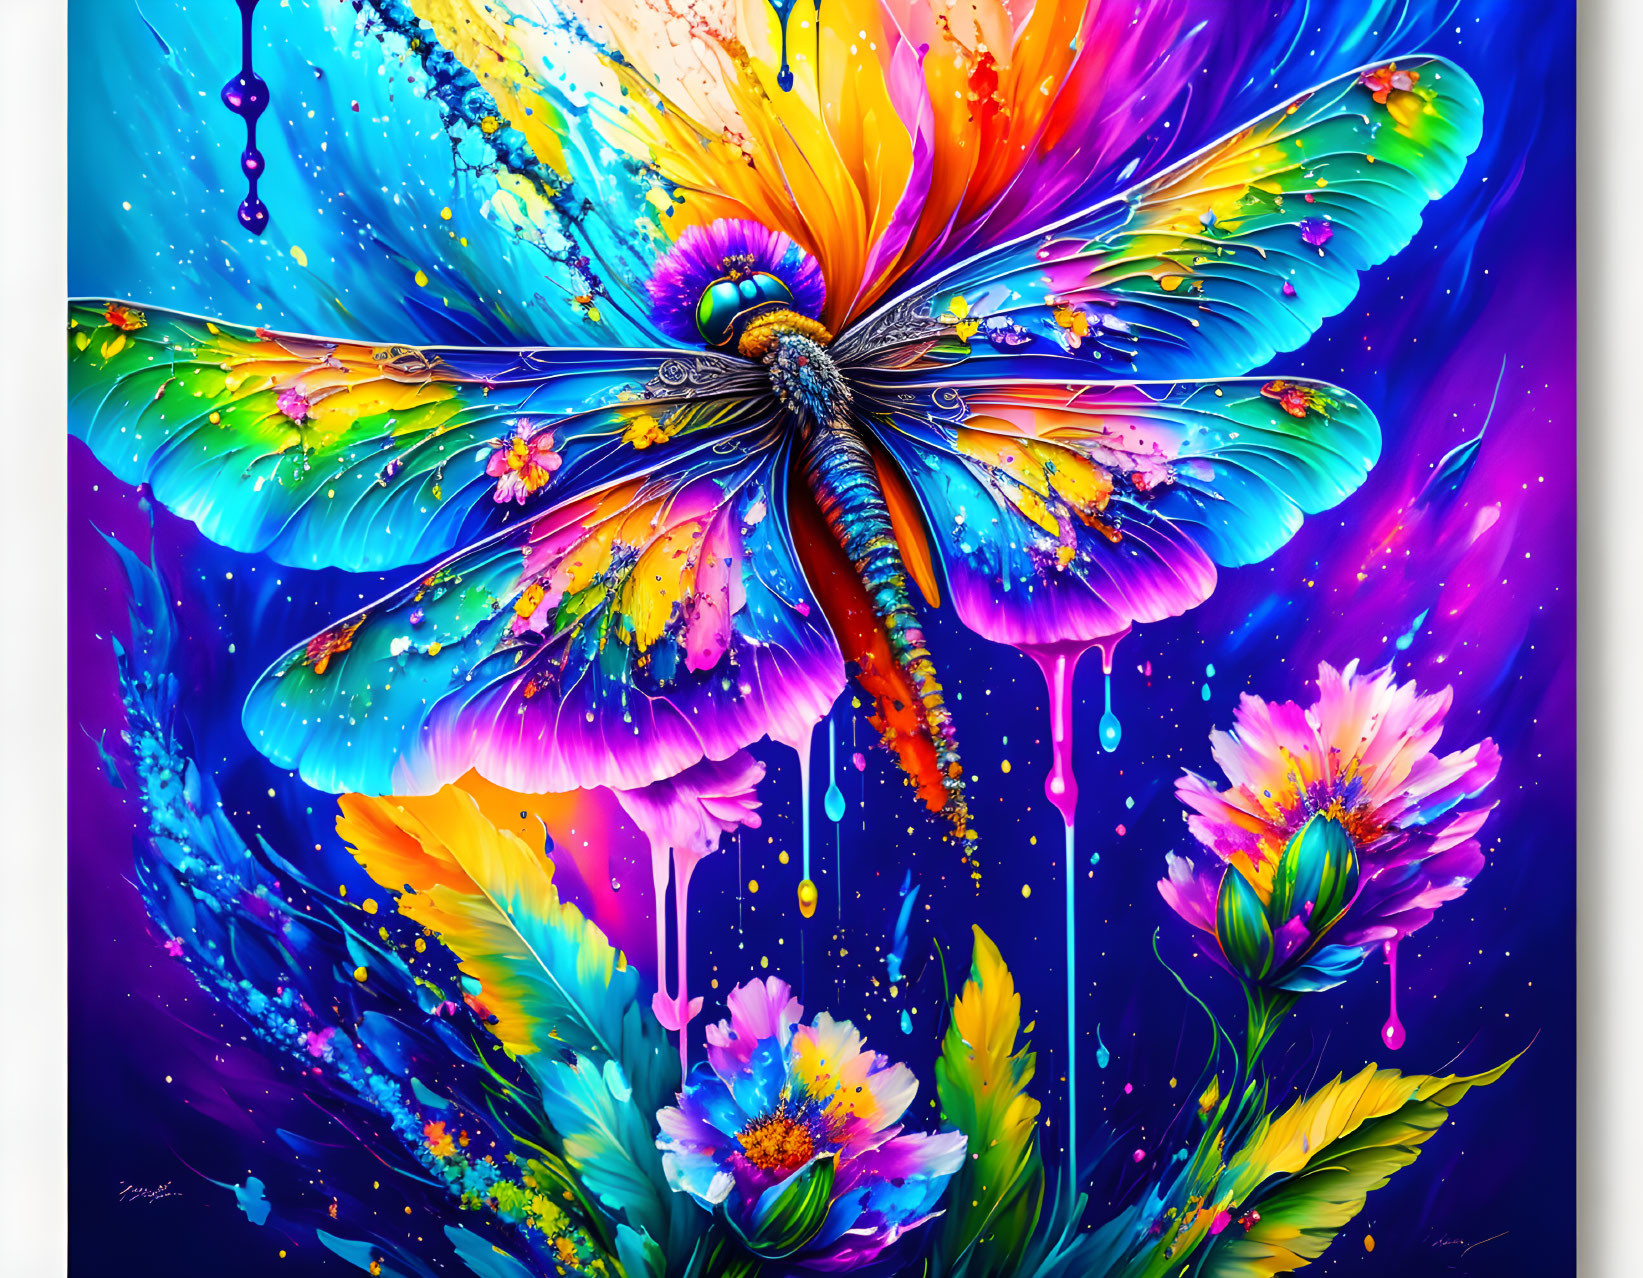 Colorful Stylized Butterfly Artwork with Flower Background